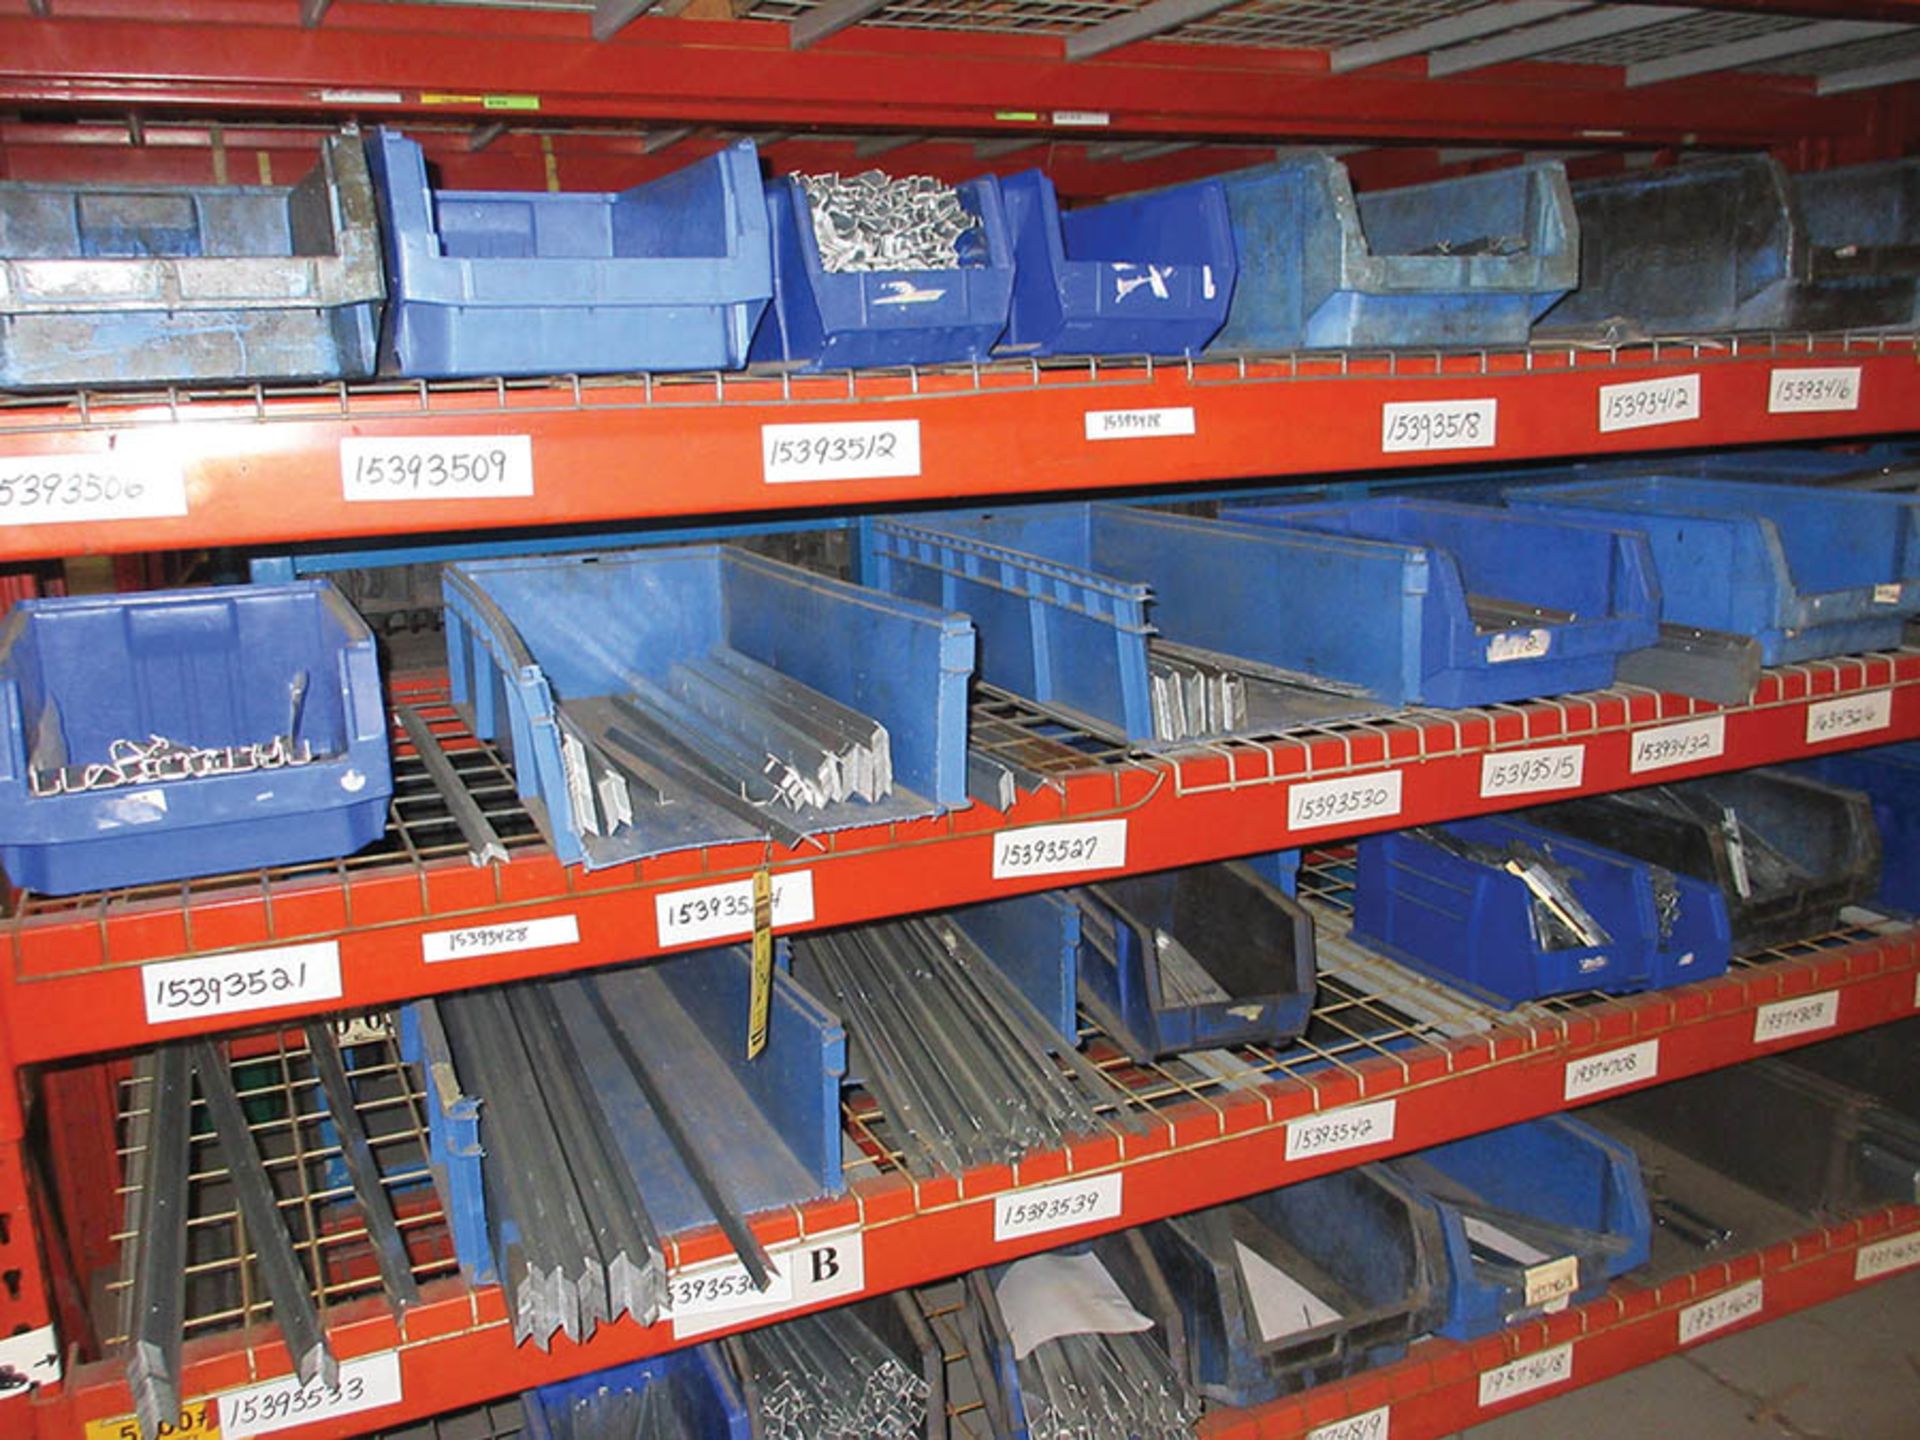 CONTENTS OF (19) SECTIONS OF PALLET RACK: CARDBOARD BOXES, PRODUCTION PARTS, AKRO BINS, FRAME - Image 8 of 11